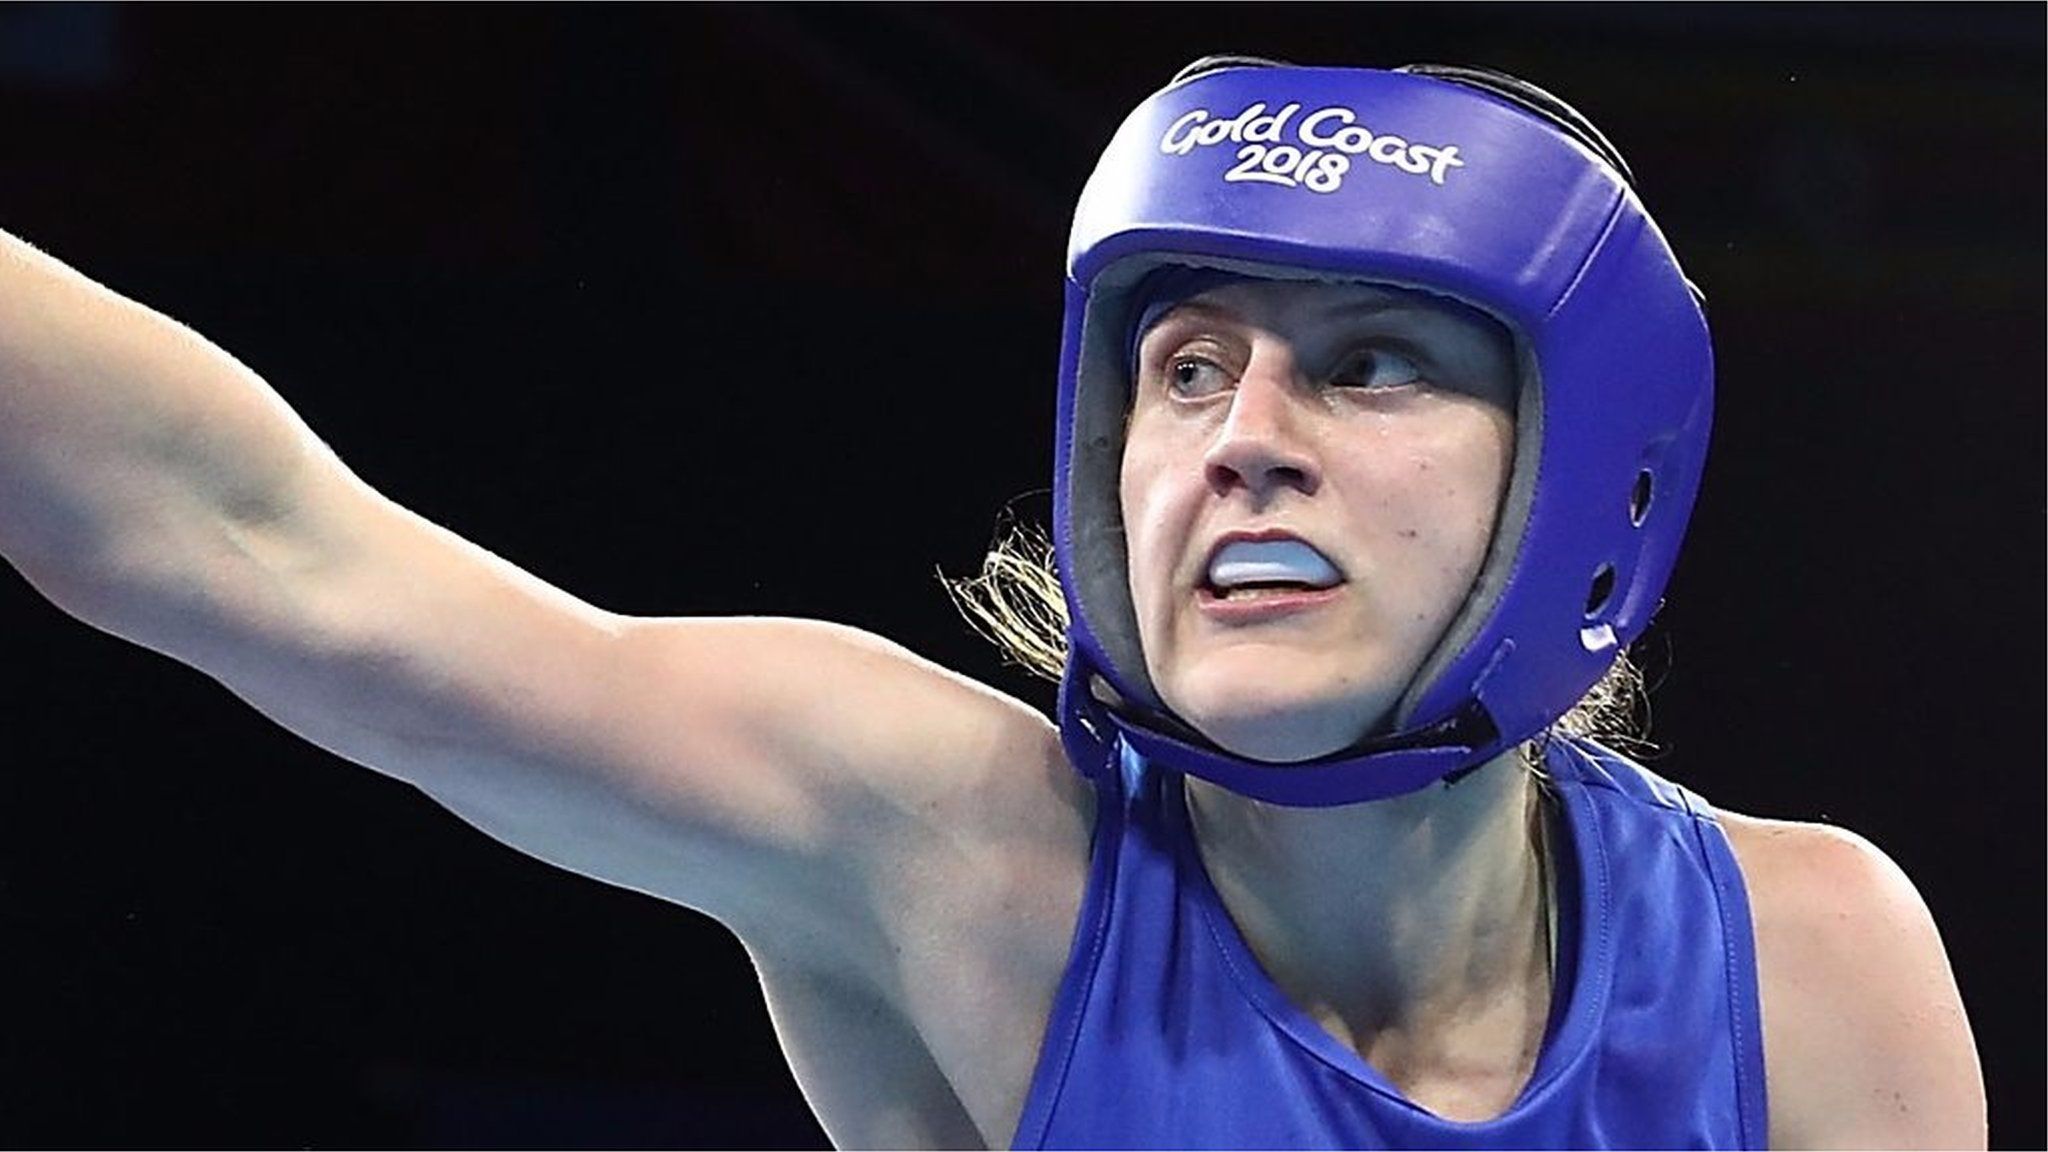 'There's not a chance I lost that fight' - heartbroken Michaela Walsh